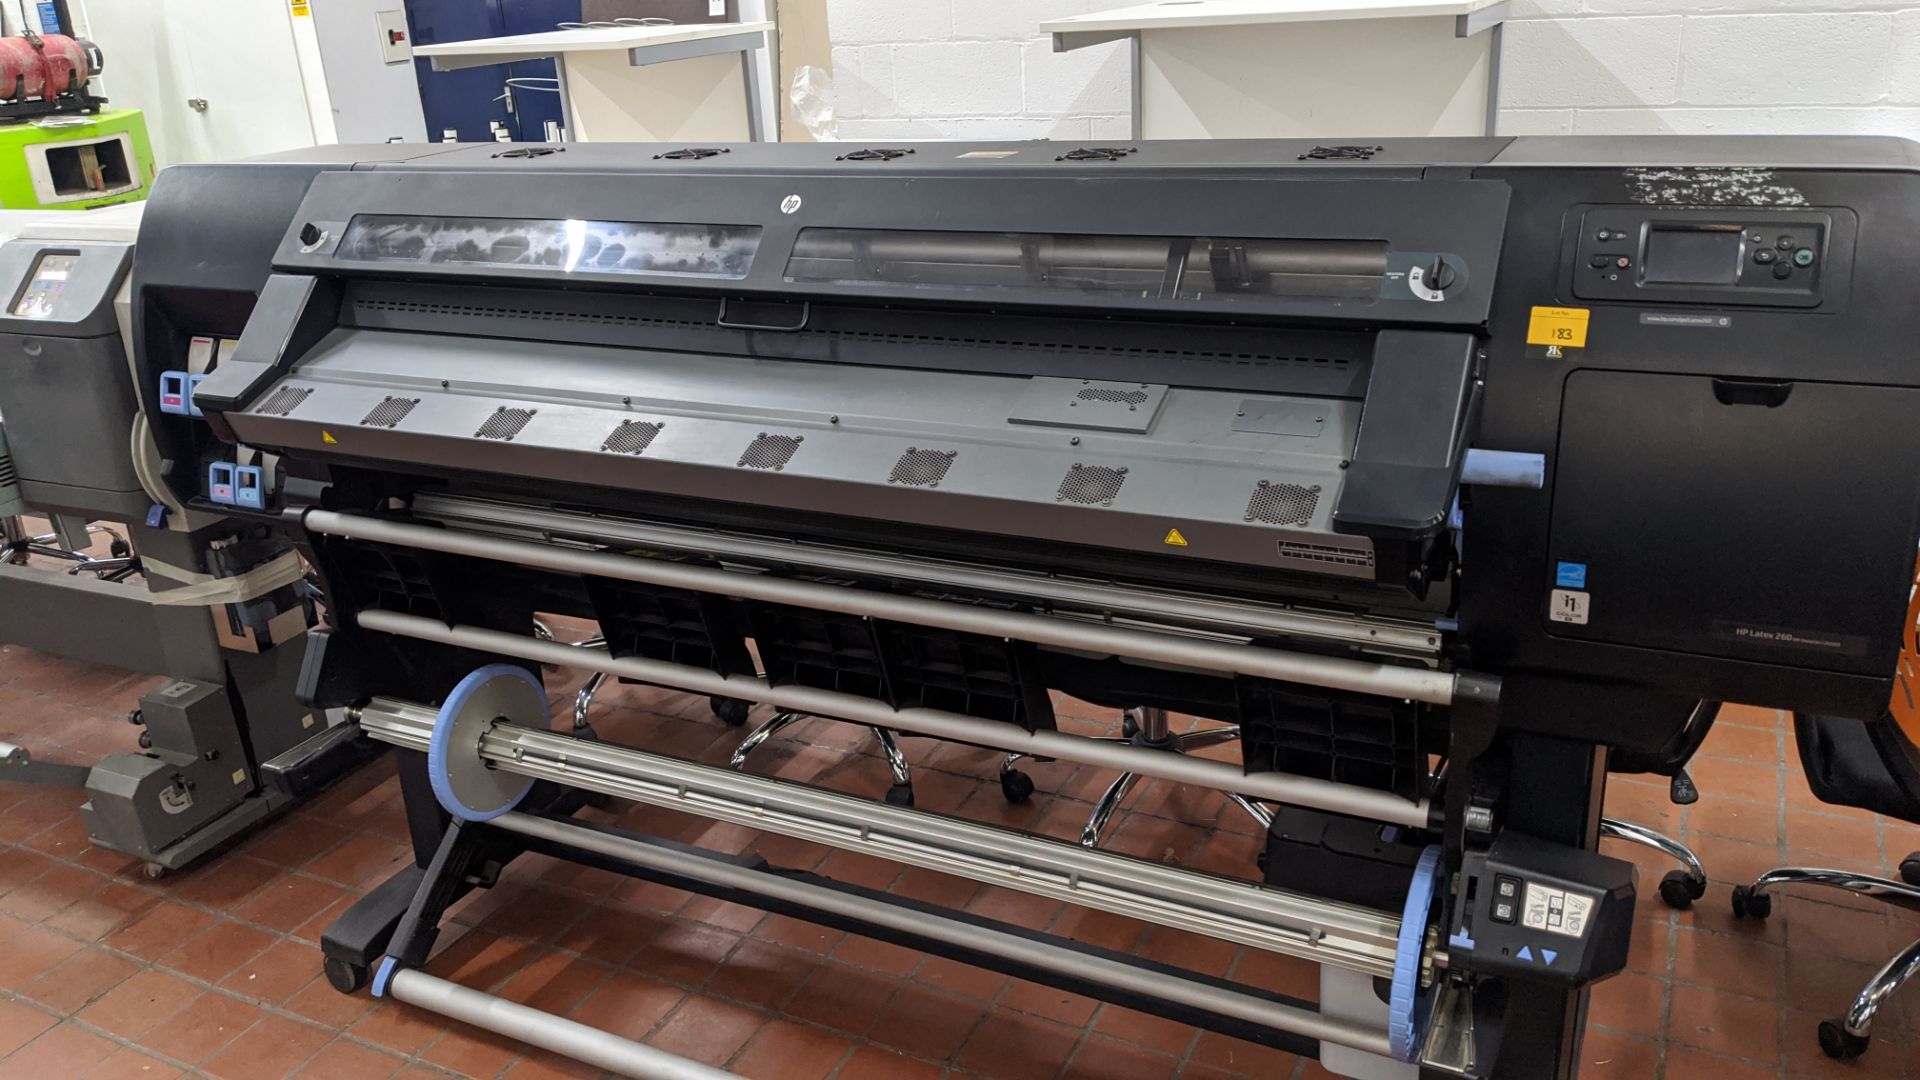 HP latex 260 (HP DesignJet L26500) wide format printer, product number CQ869A (61" capacity).